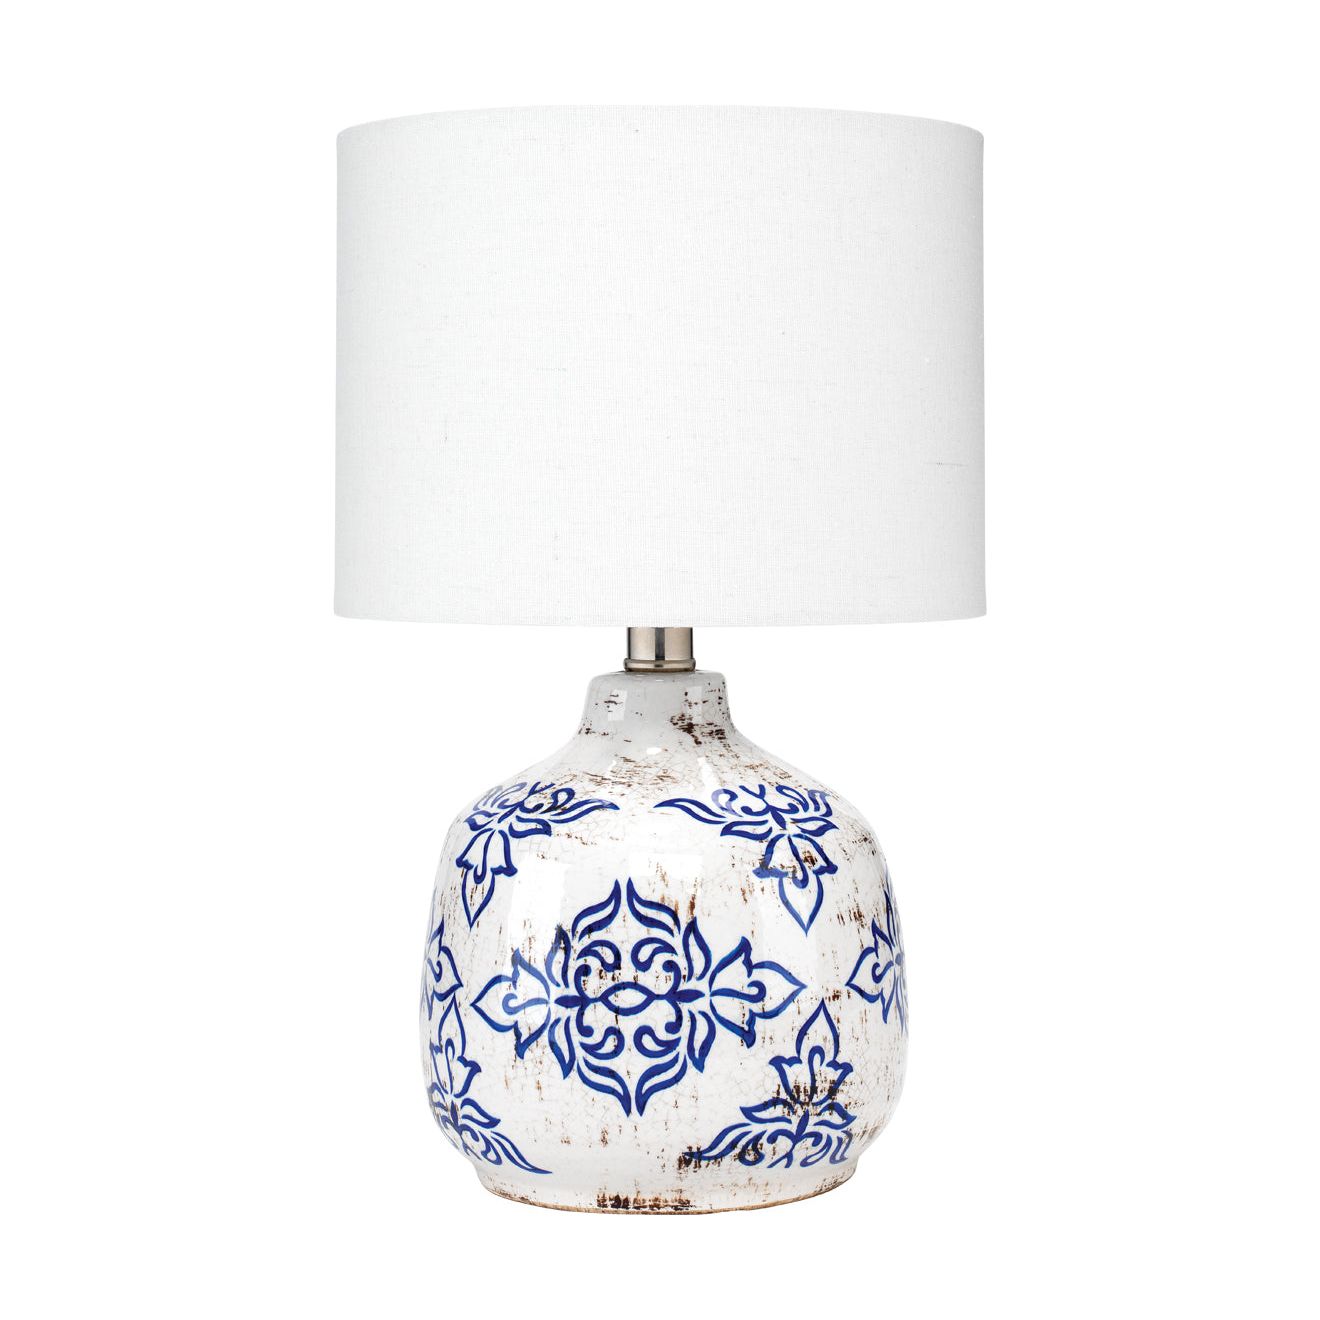 Jamie Young Company - LSRUBYWHBL - Ruby Table Lamp - Ruby - Blue